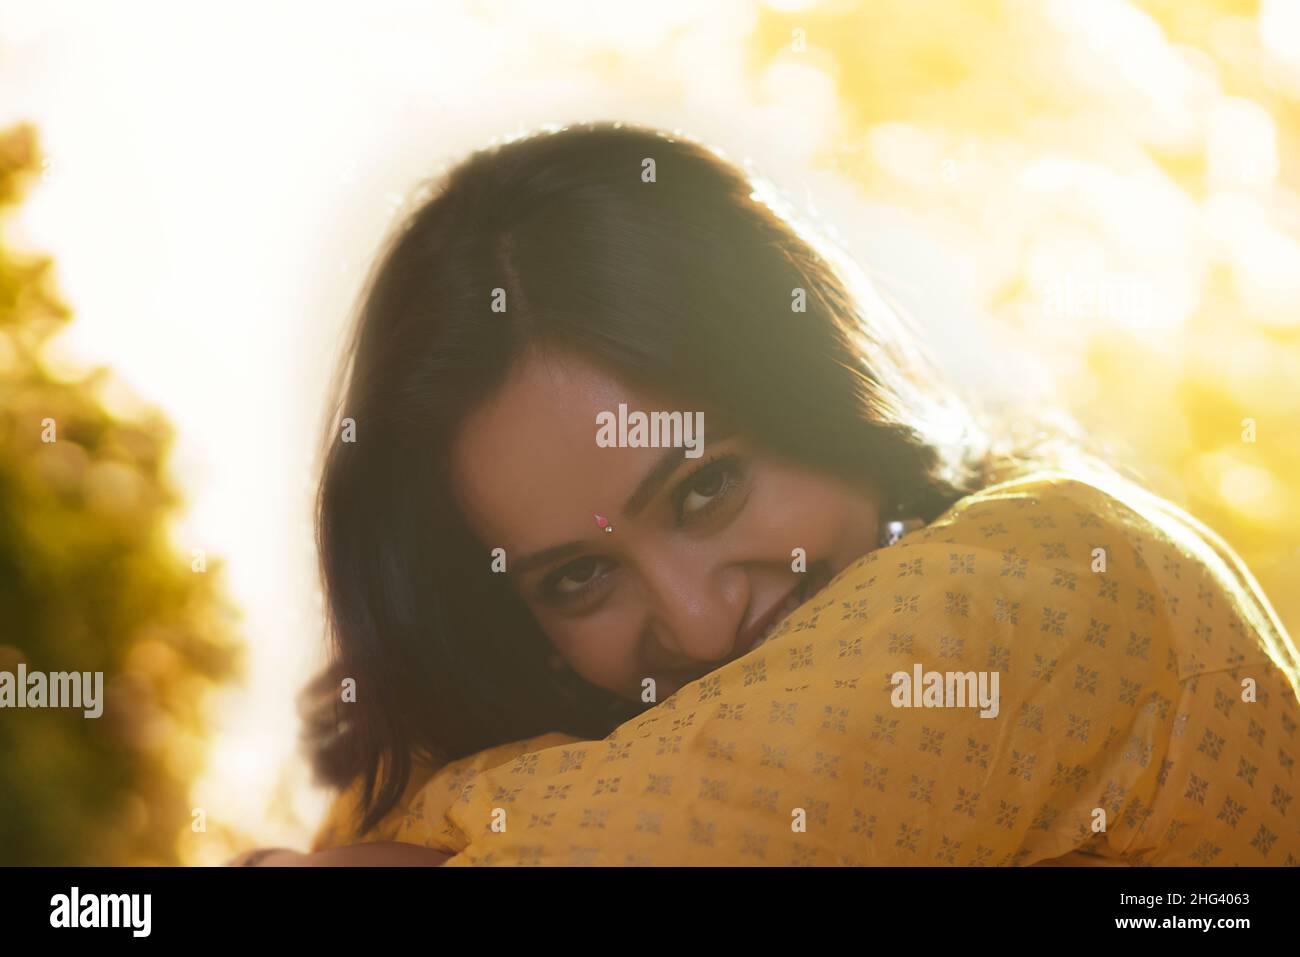 Close-up portrait of shy woman looking at camera Stock Photo